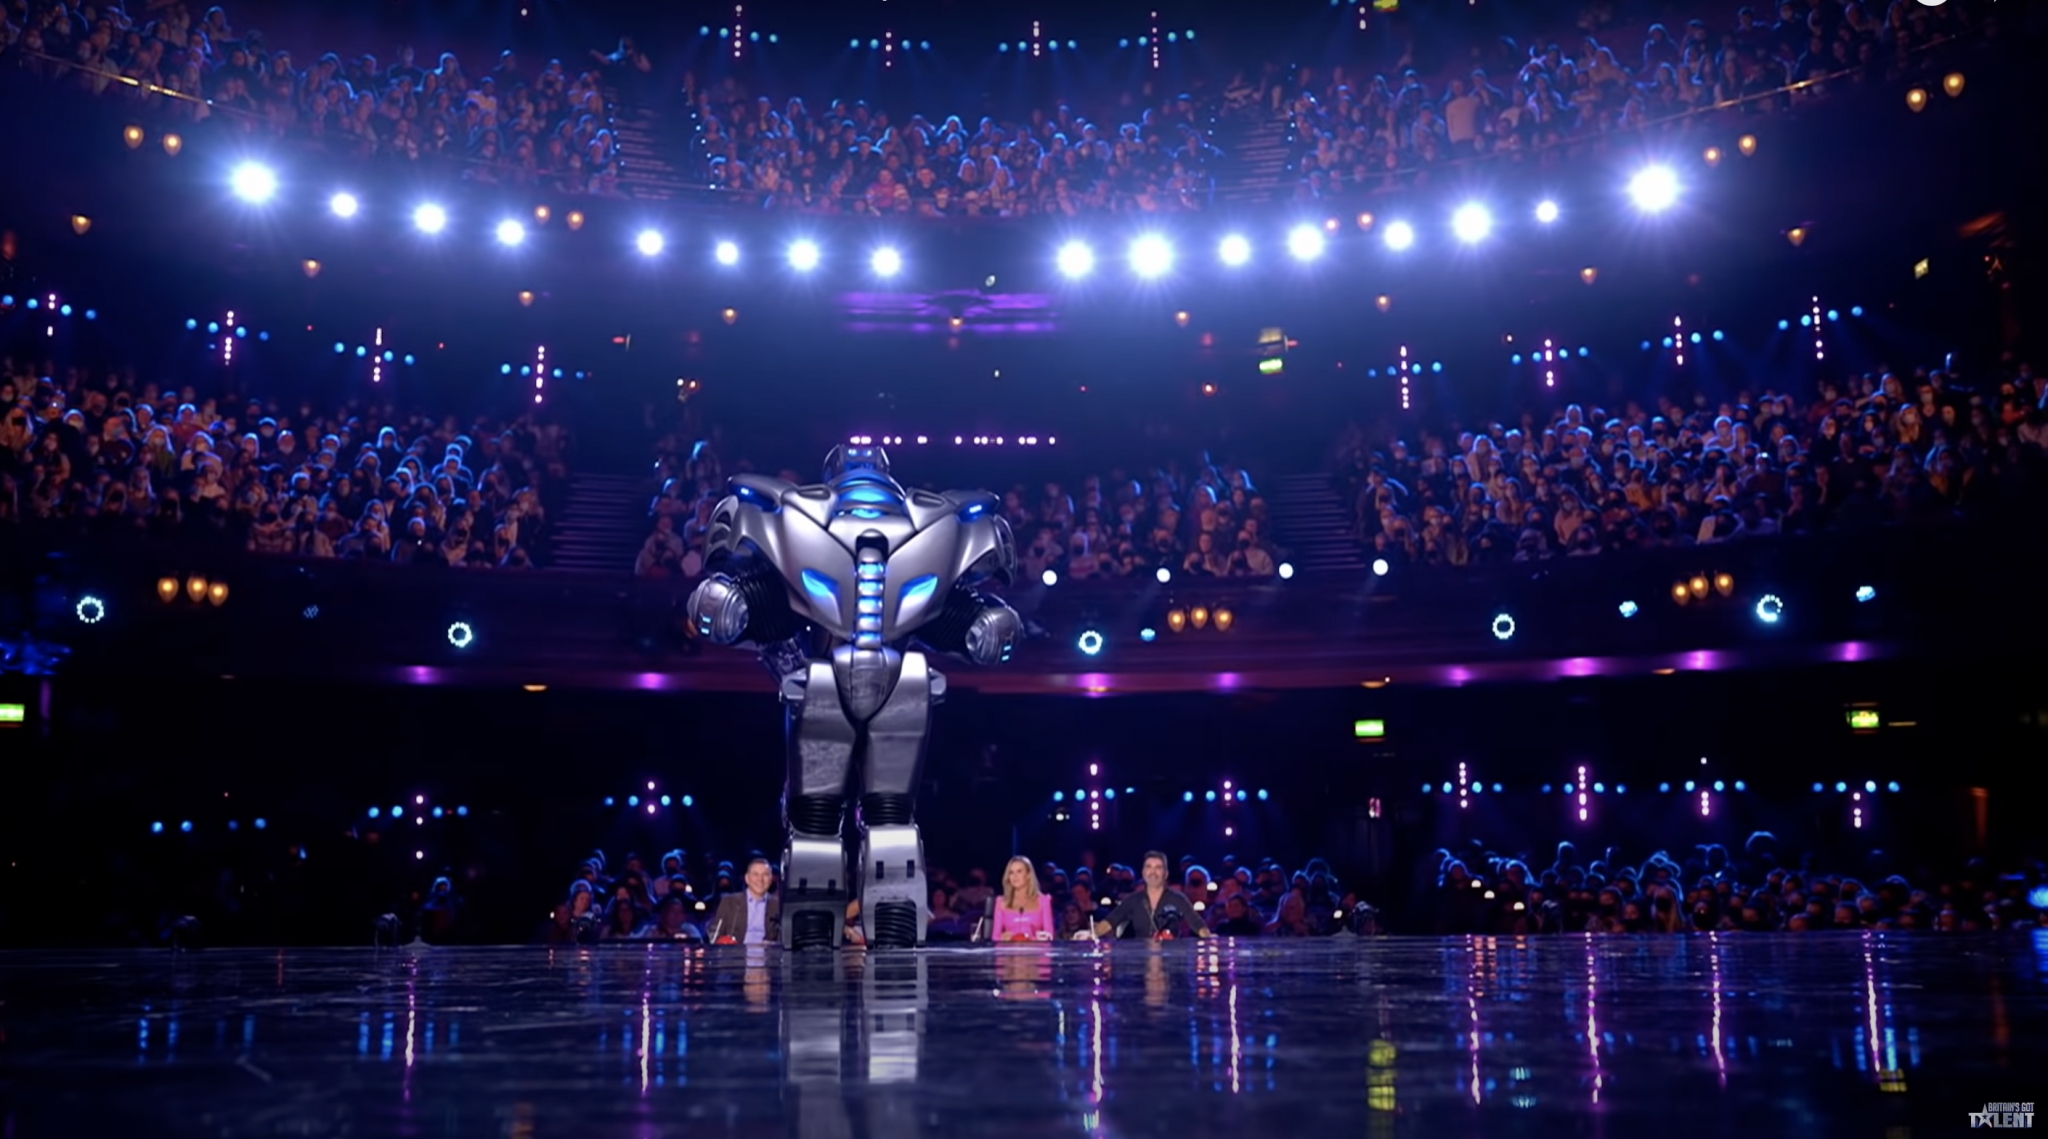 Titan the Robot faces the judges and the audience at his audition on Britain's Got Talent at the London Palladium. #BGT